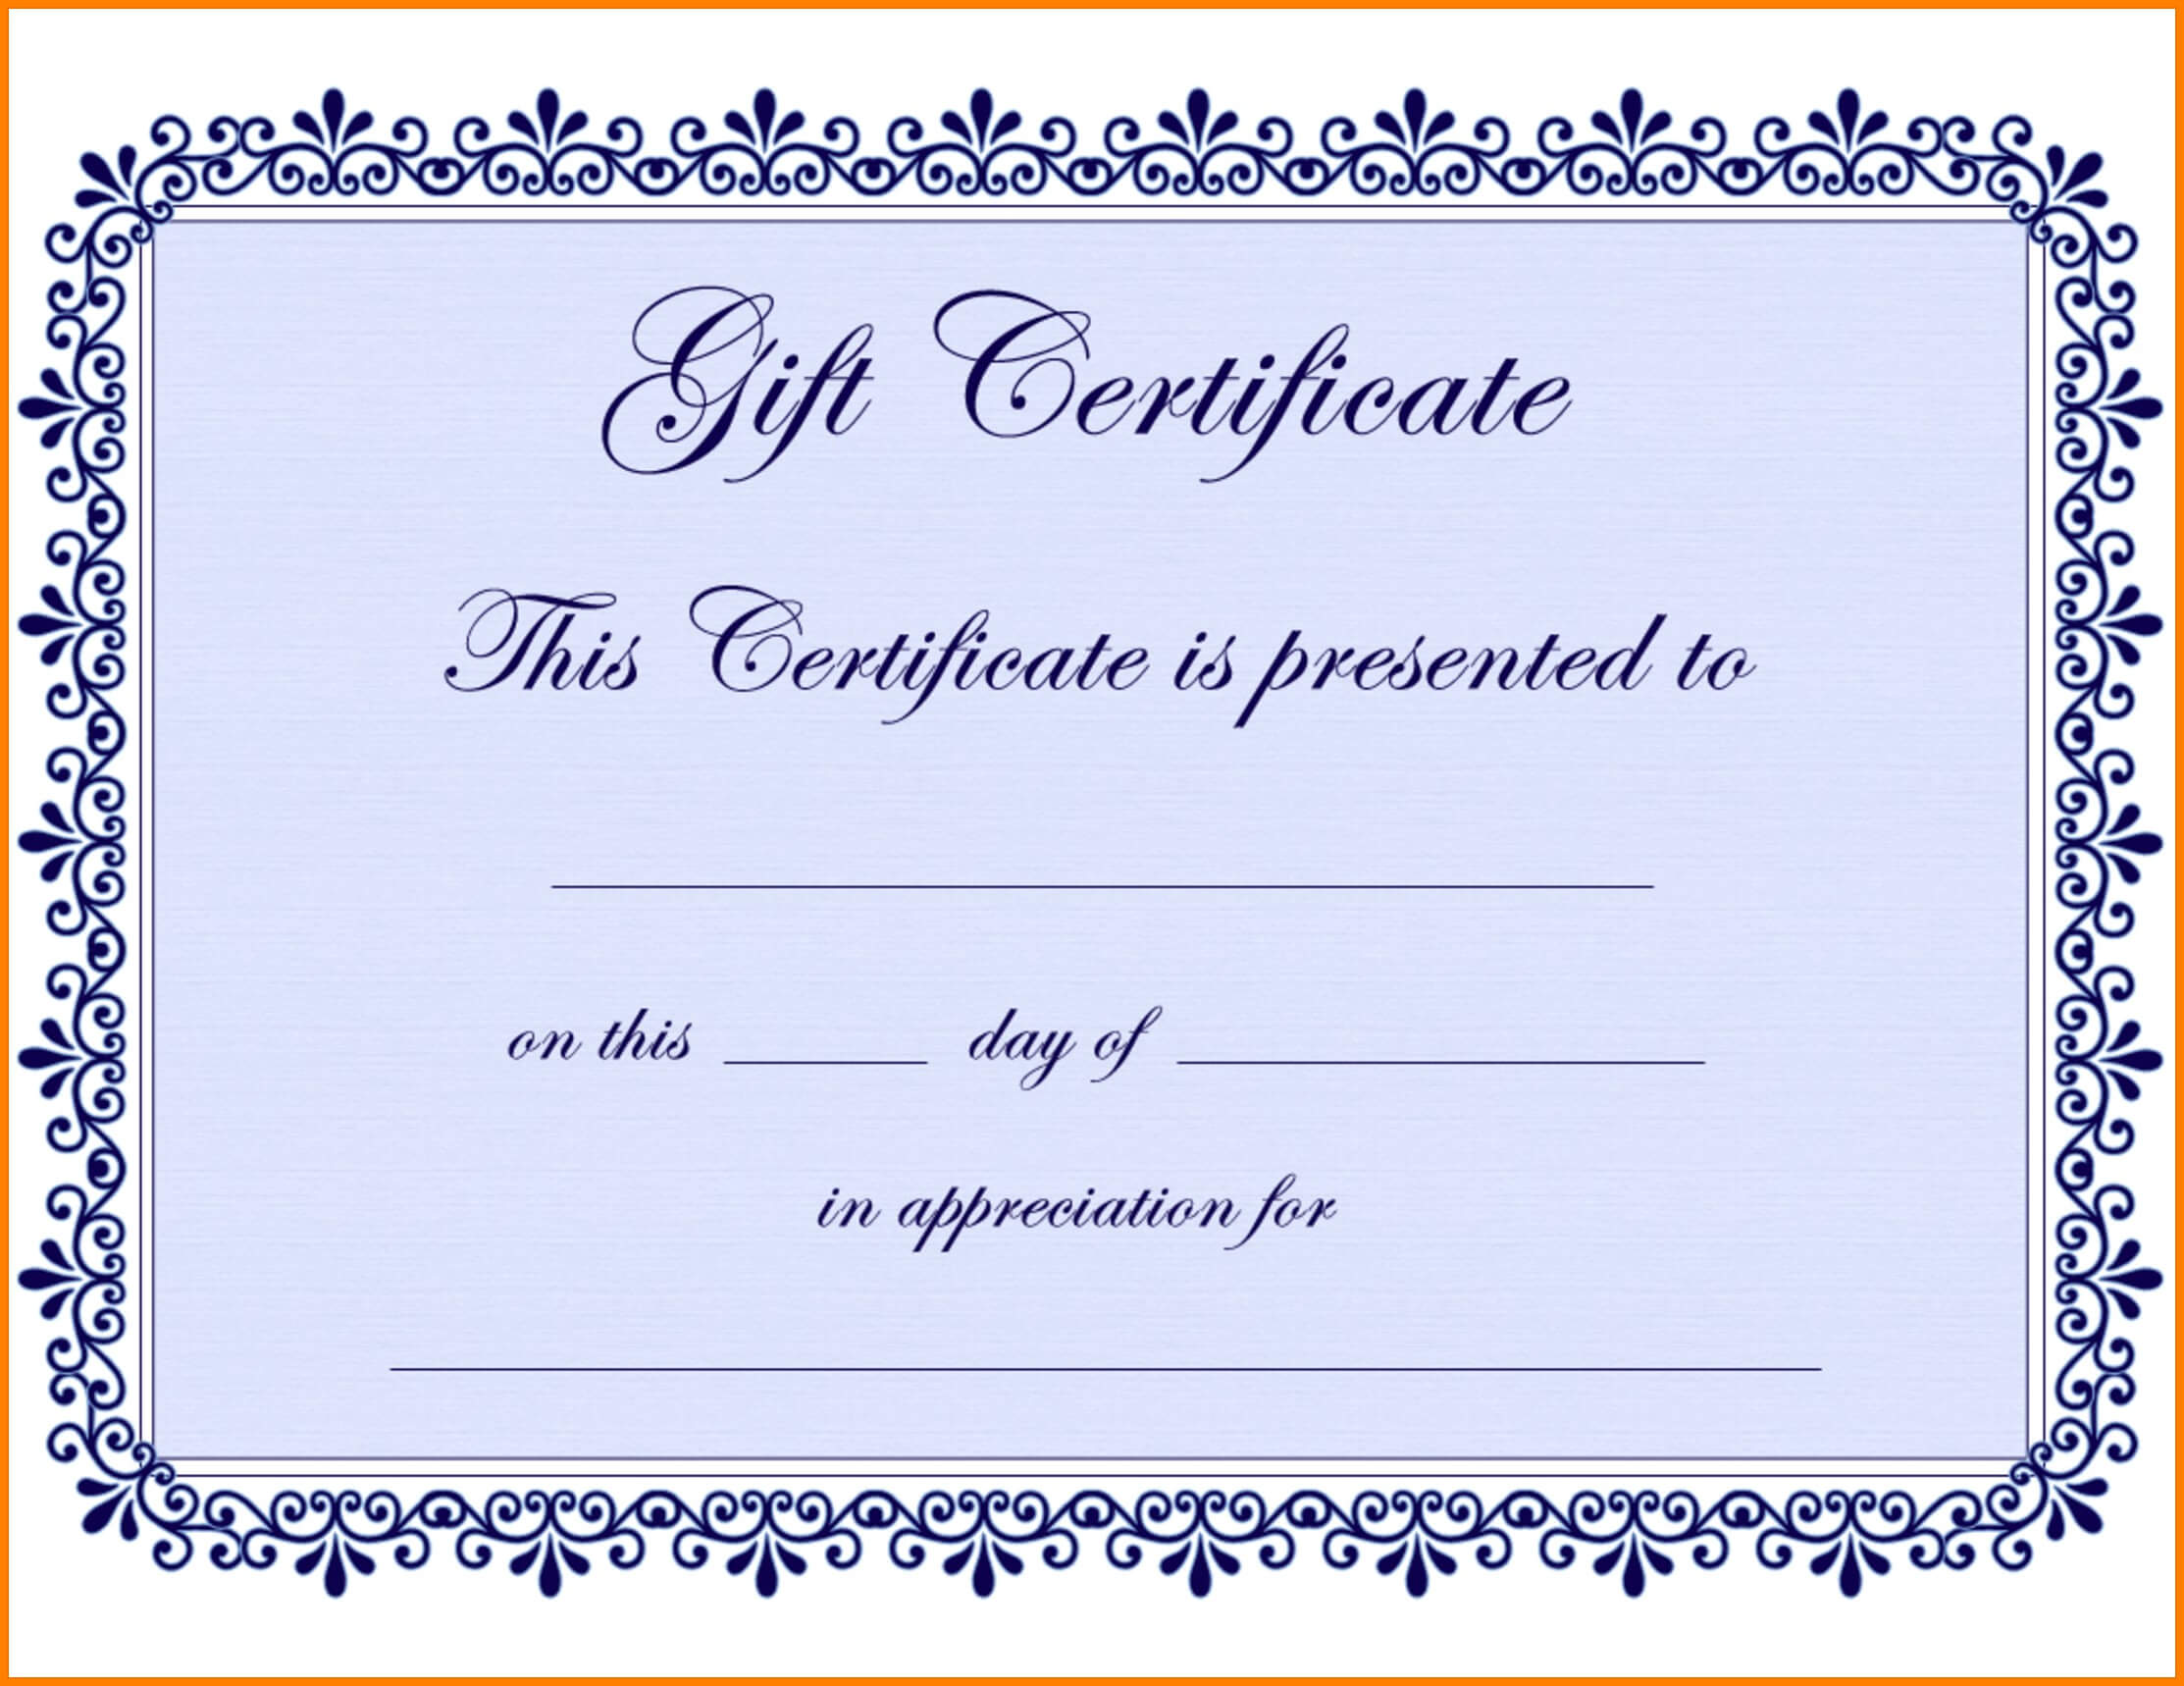 Gift Certificate Template Png | Certificatetemplategift Inside Free Certificate Templates For Word 2007